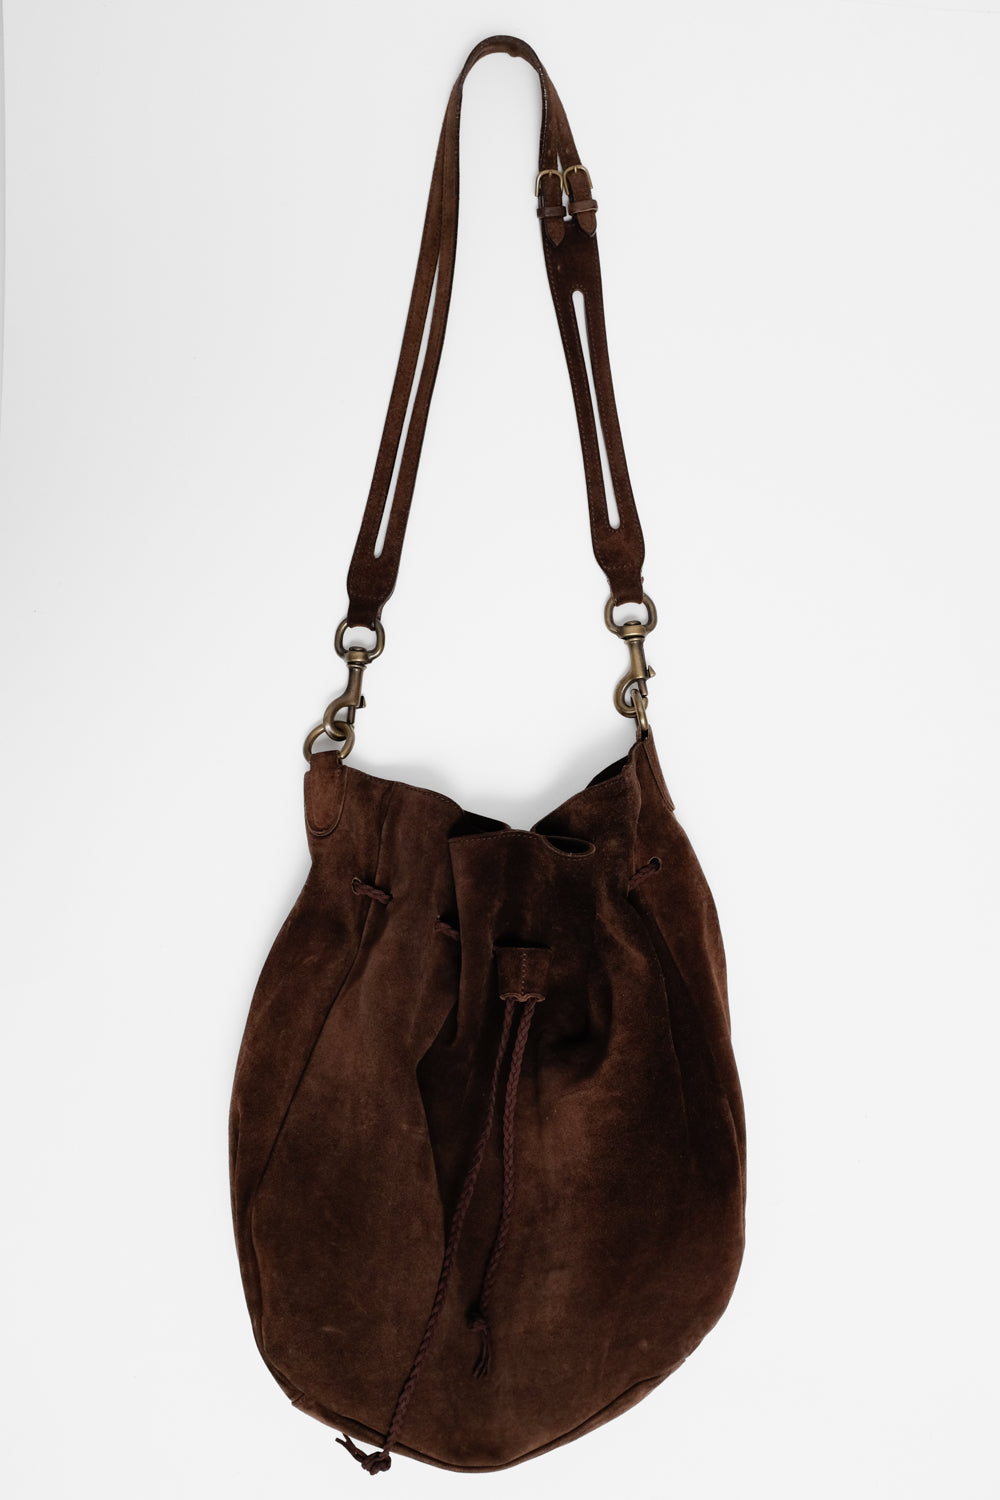 STRENESSE XL BROWN SUEDE LEATHER BAG